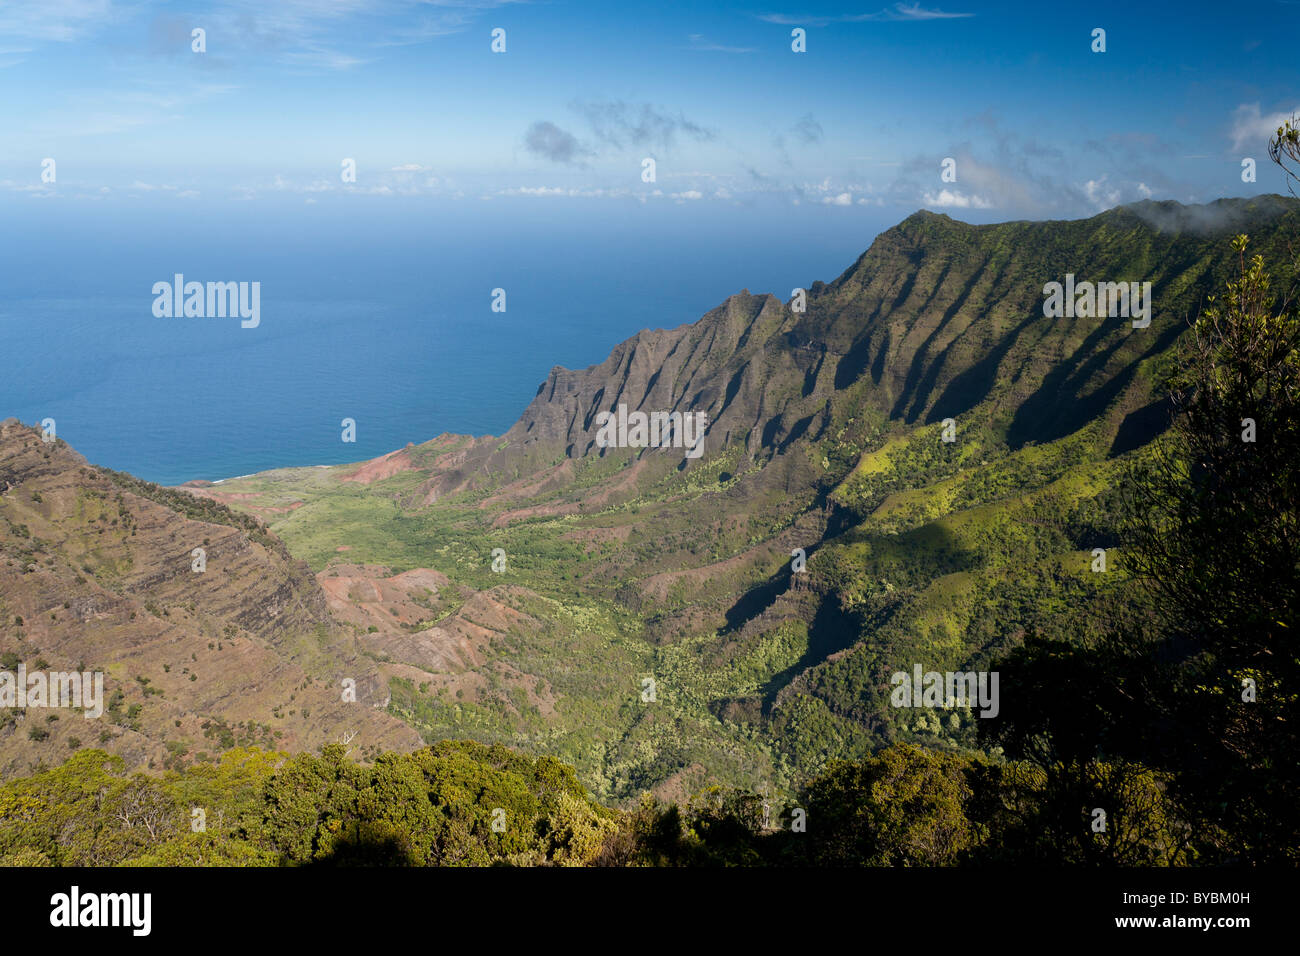 Kalalau Valley and mountains crisply above. View over the Kalalau Valley under a bright blue sky with the Pacific Ocean beyond. Stock Photo